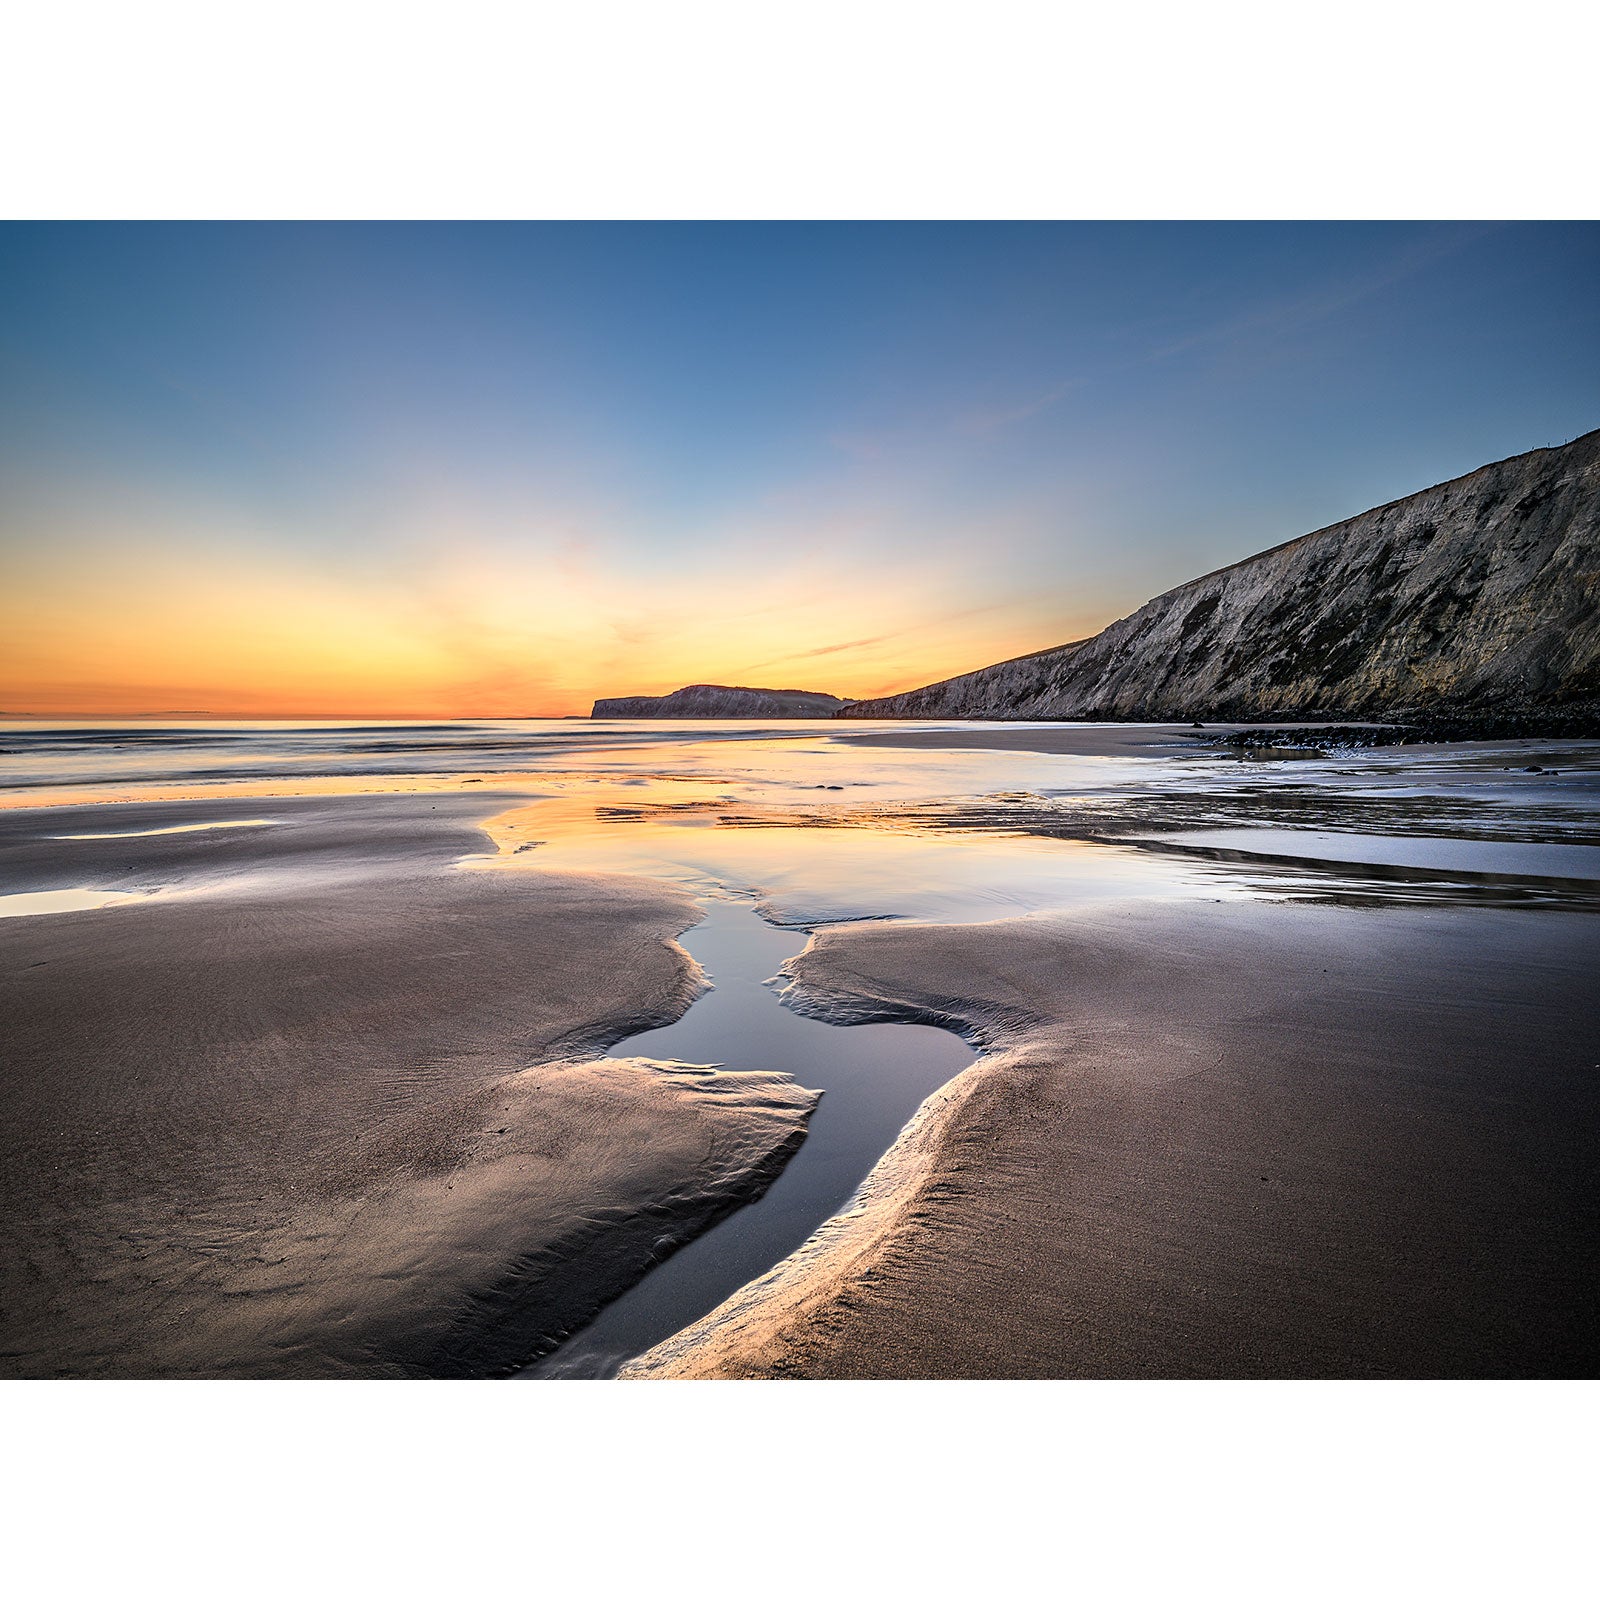 A serene sunset at a coastal beach with water channels in the sand and cliffs in the background, reminiscent of a scene captured by Available Light Photography's Compton Bay.